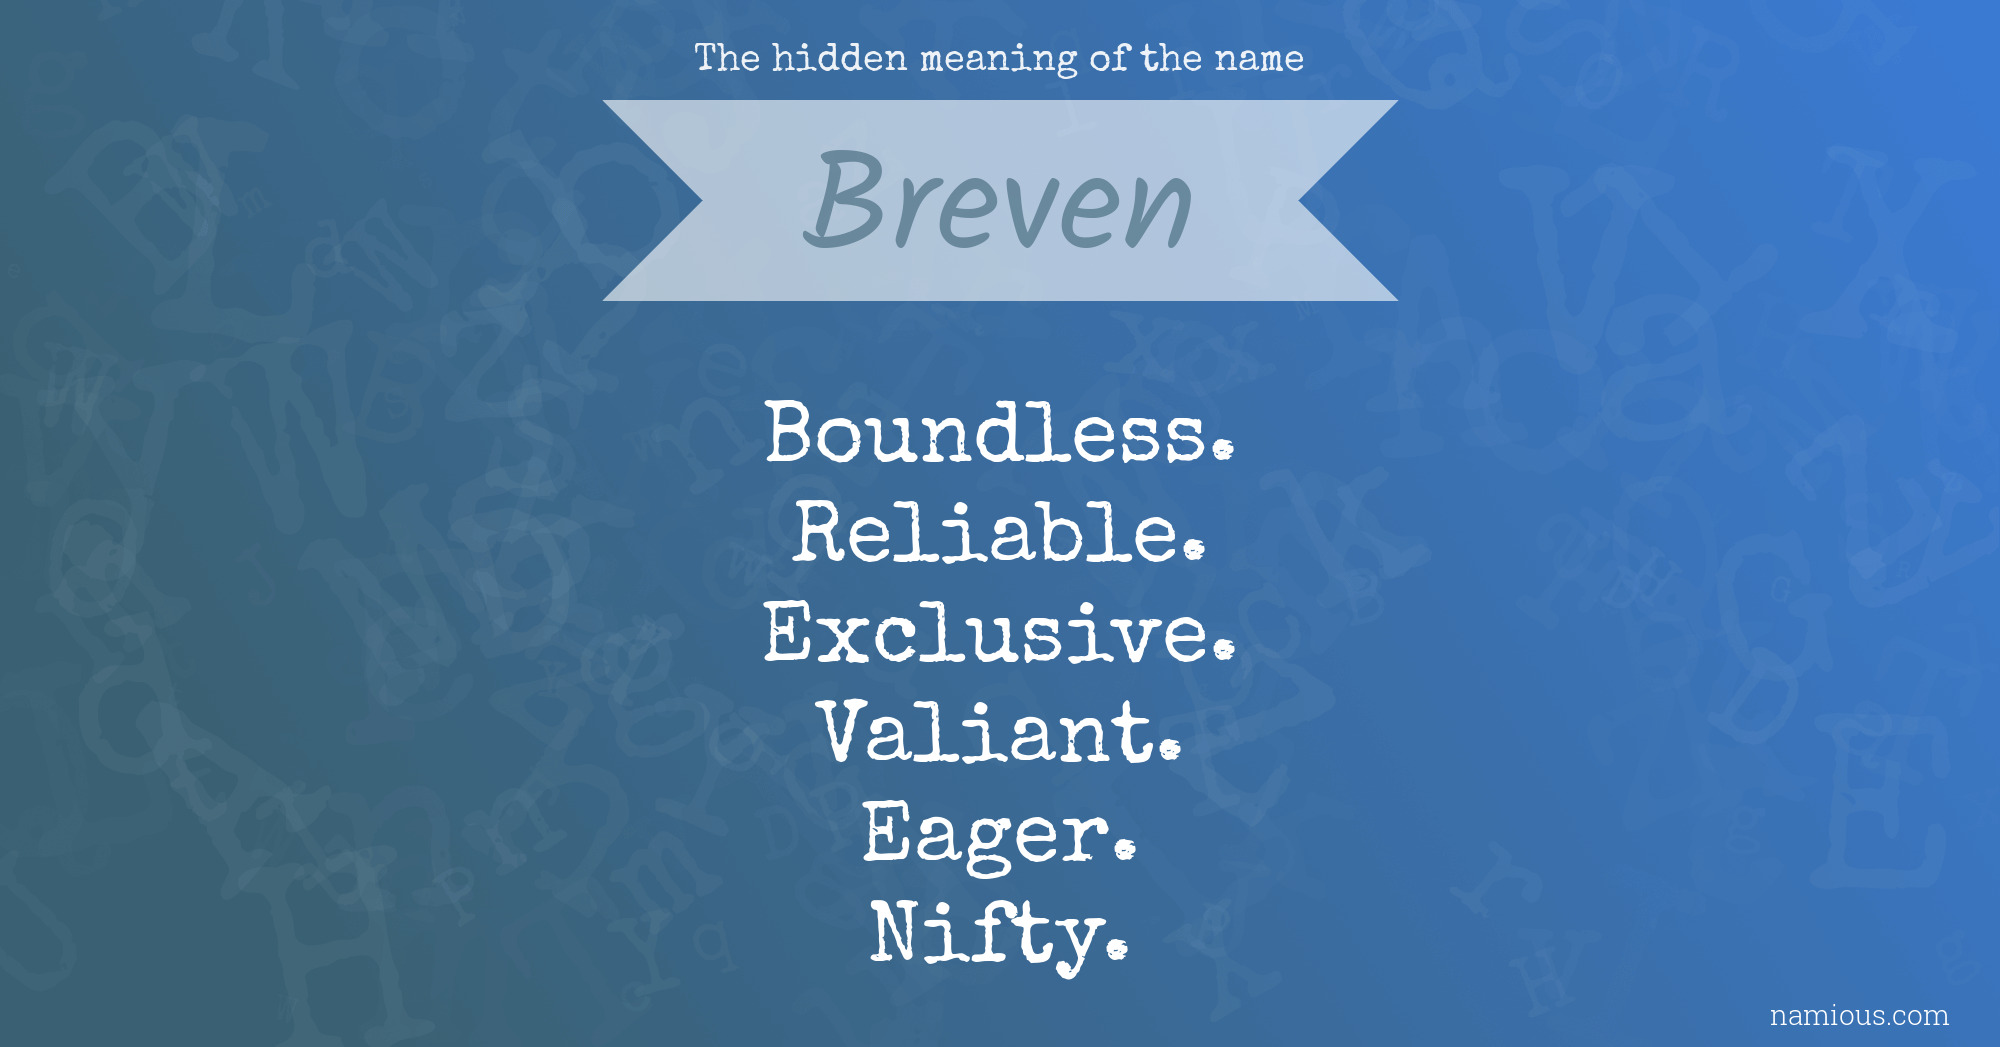 The hidden meaning of the name Breven